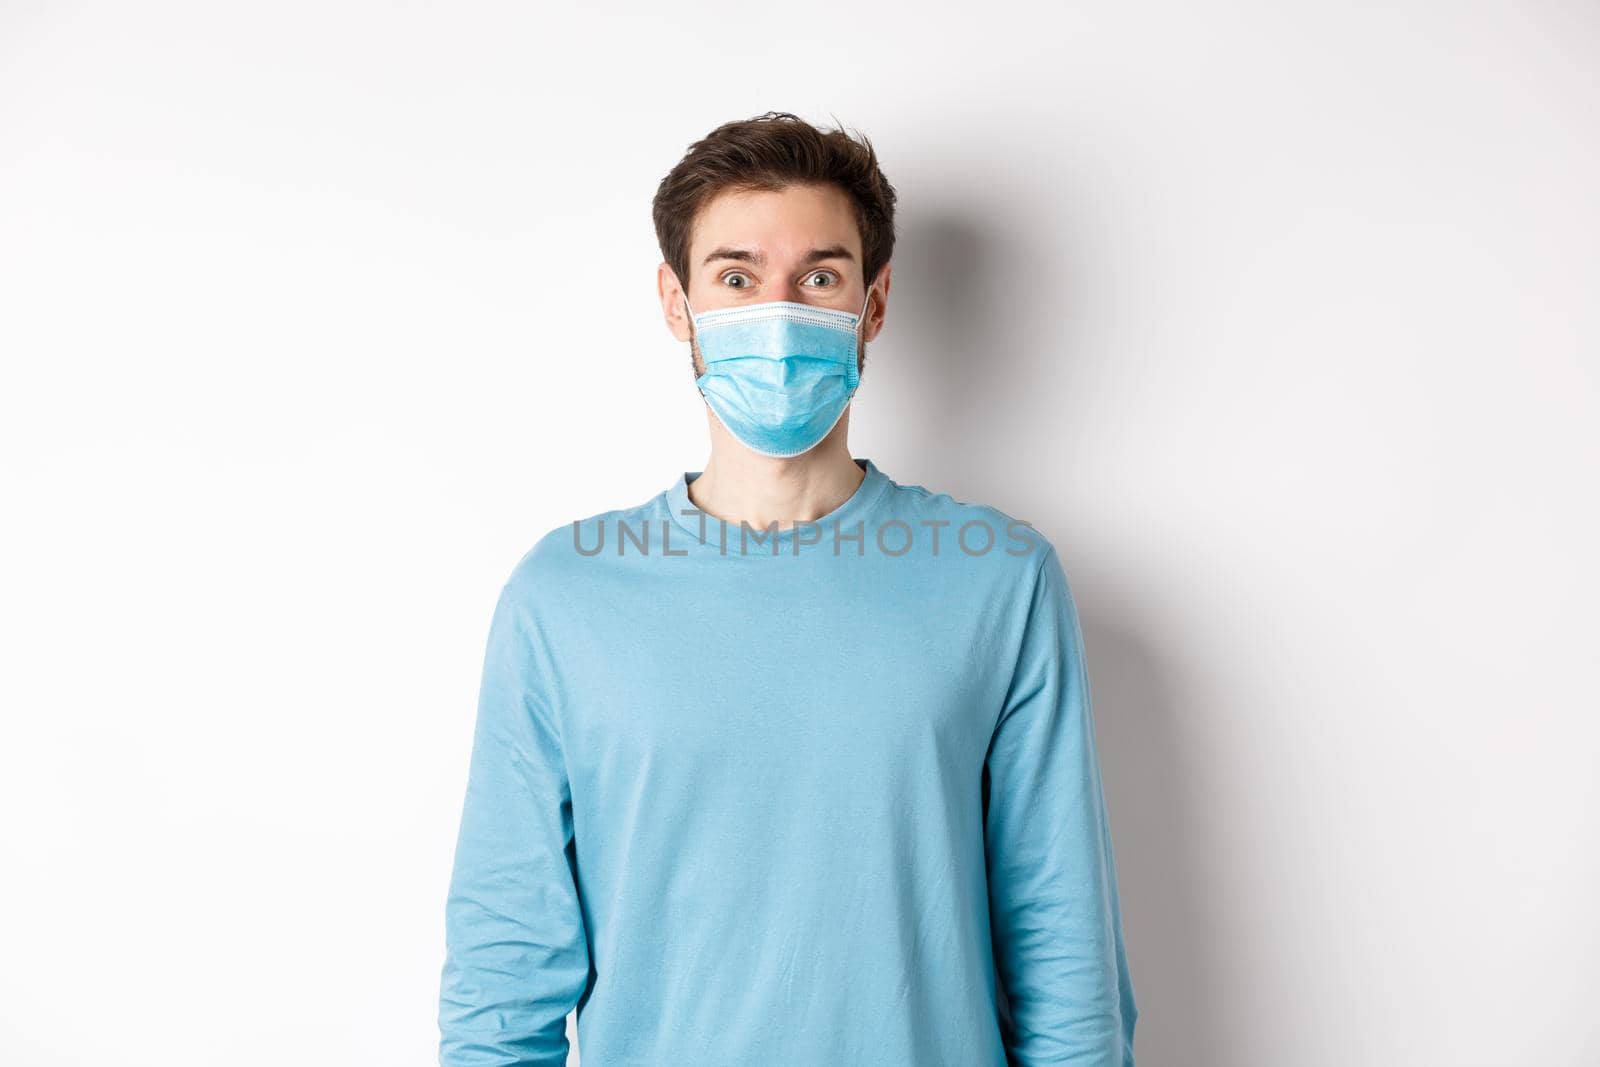 Covid-19, pandemic and social distancing concept. Cheerful man in medical mask raising eyebrows, looking surprised and excited at camera, standing over white background.